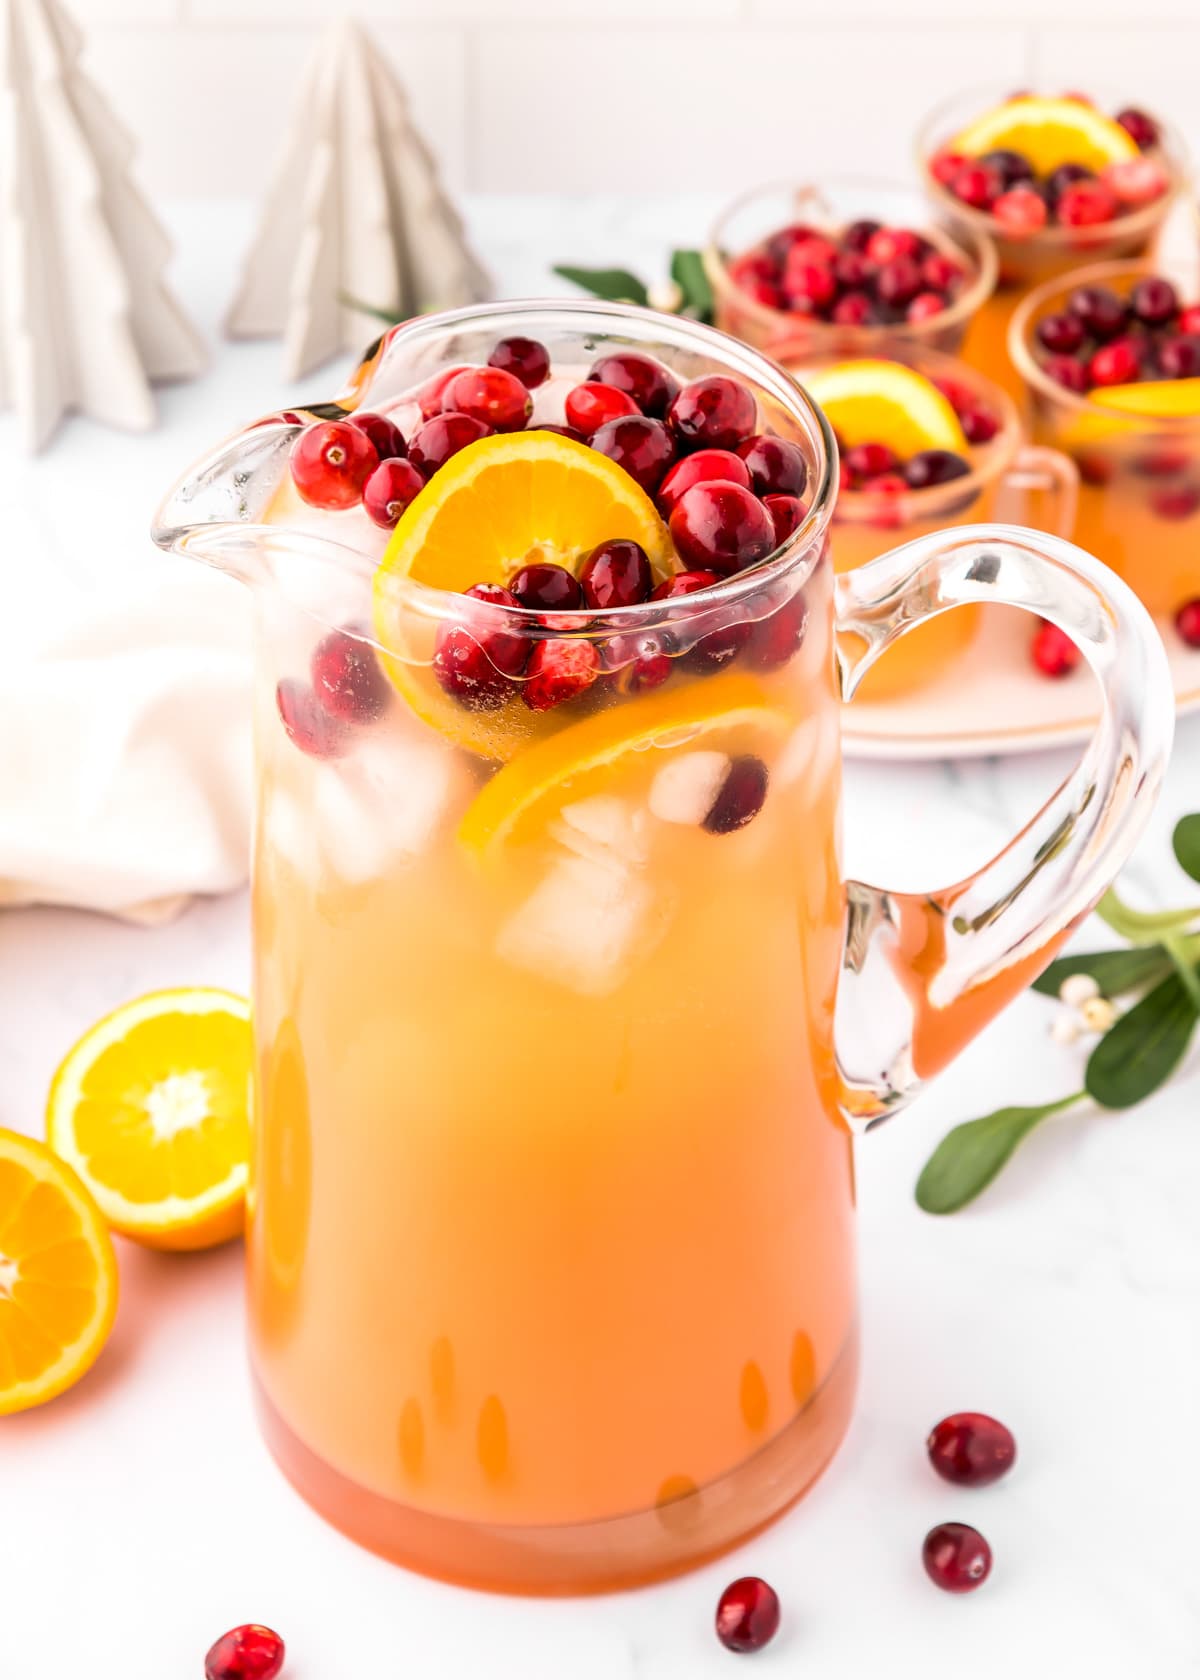 A glass pitcher filled with juice and garnished with cranberries and oranges.